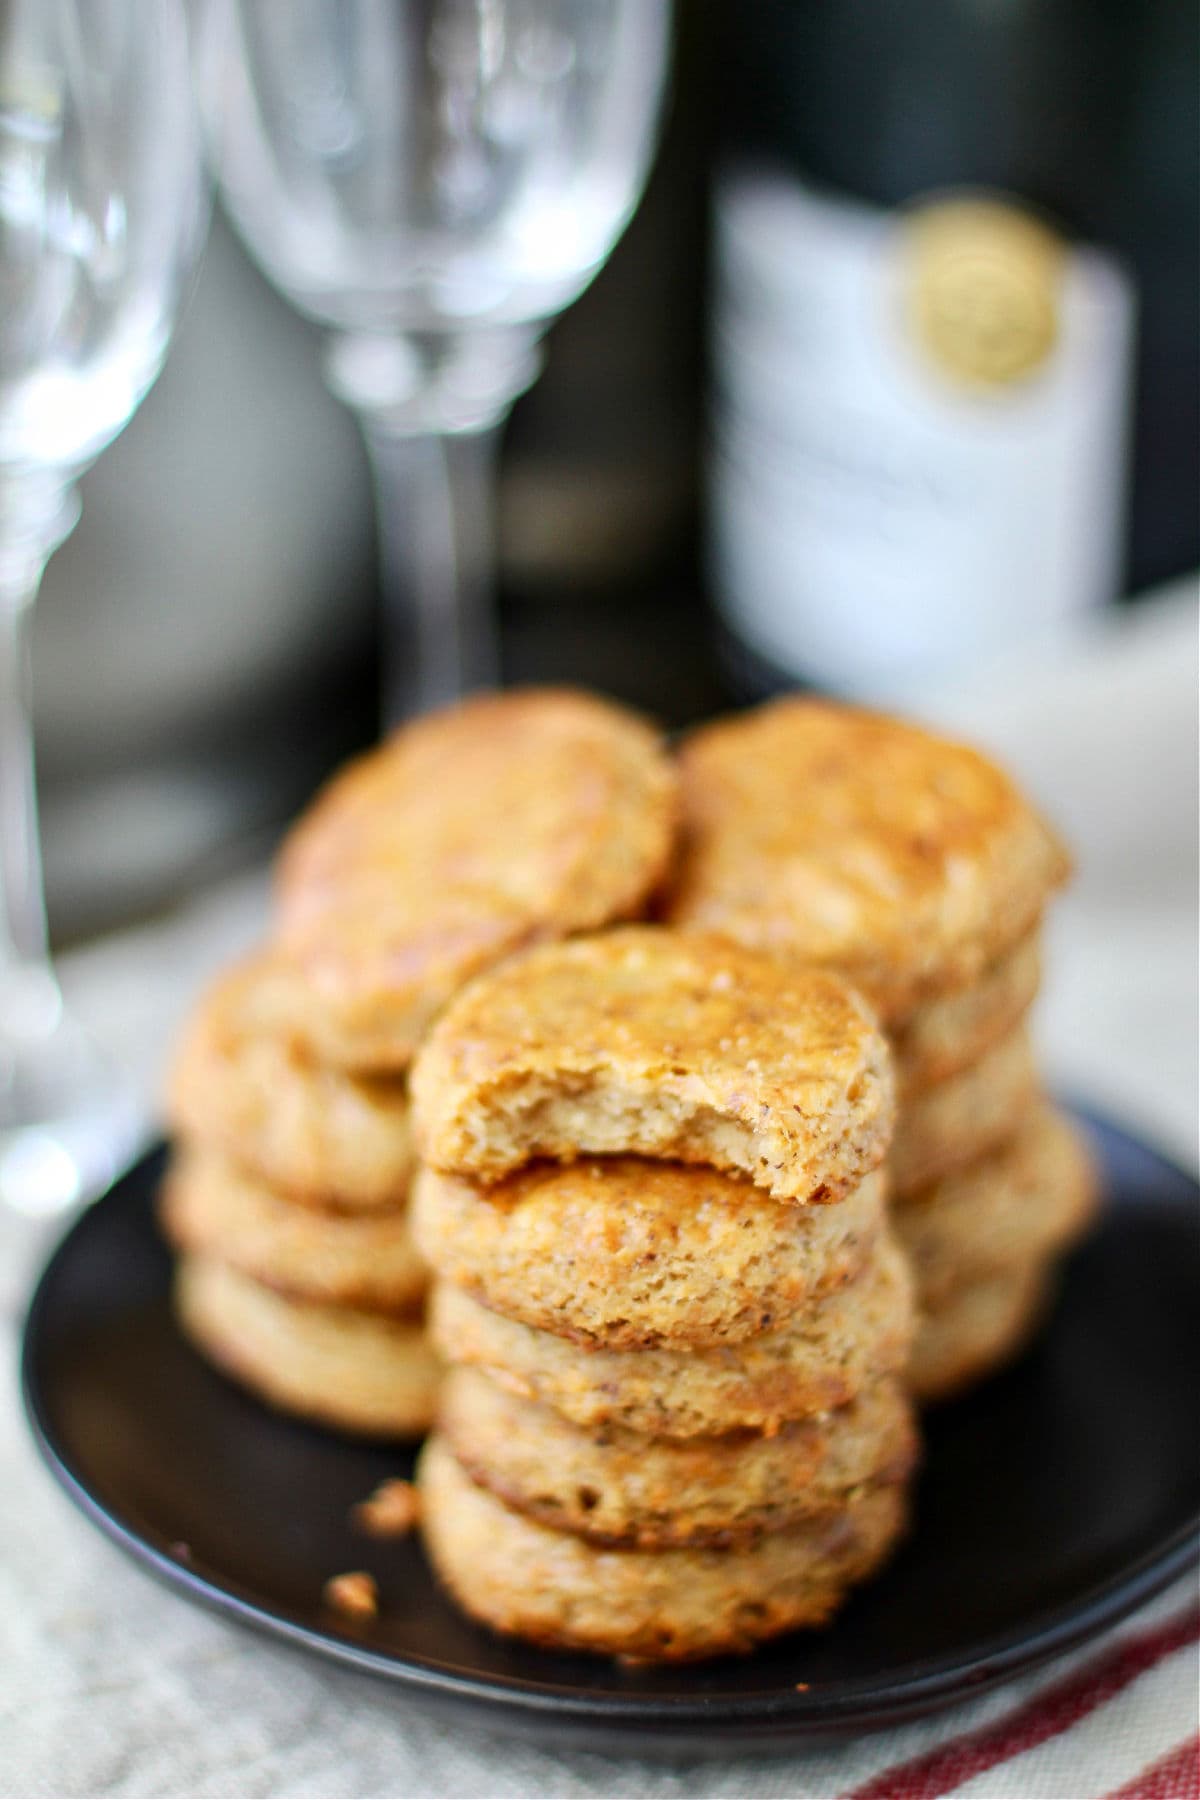 Cheddar Cheese and Pecan Crisps stacked.